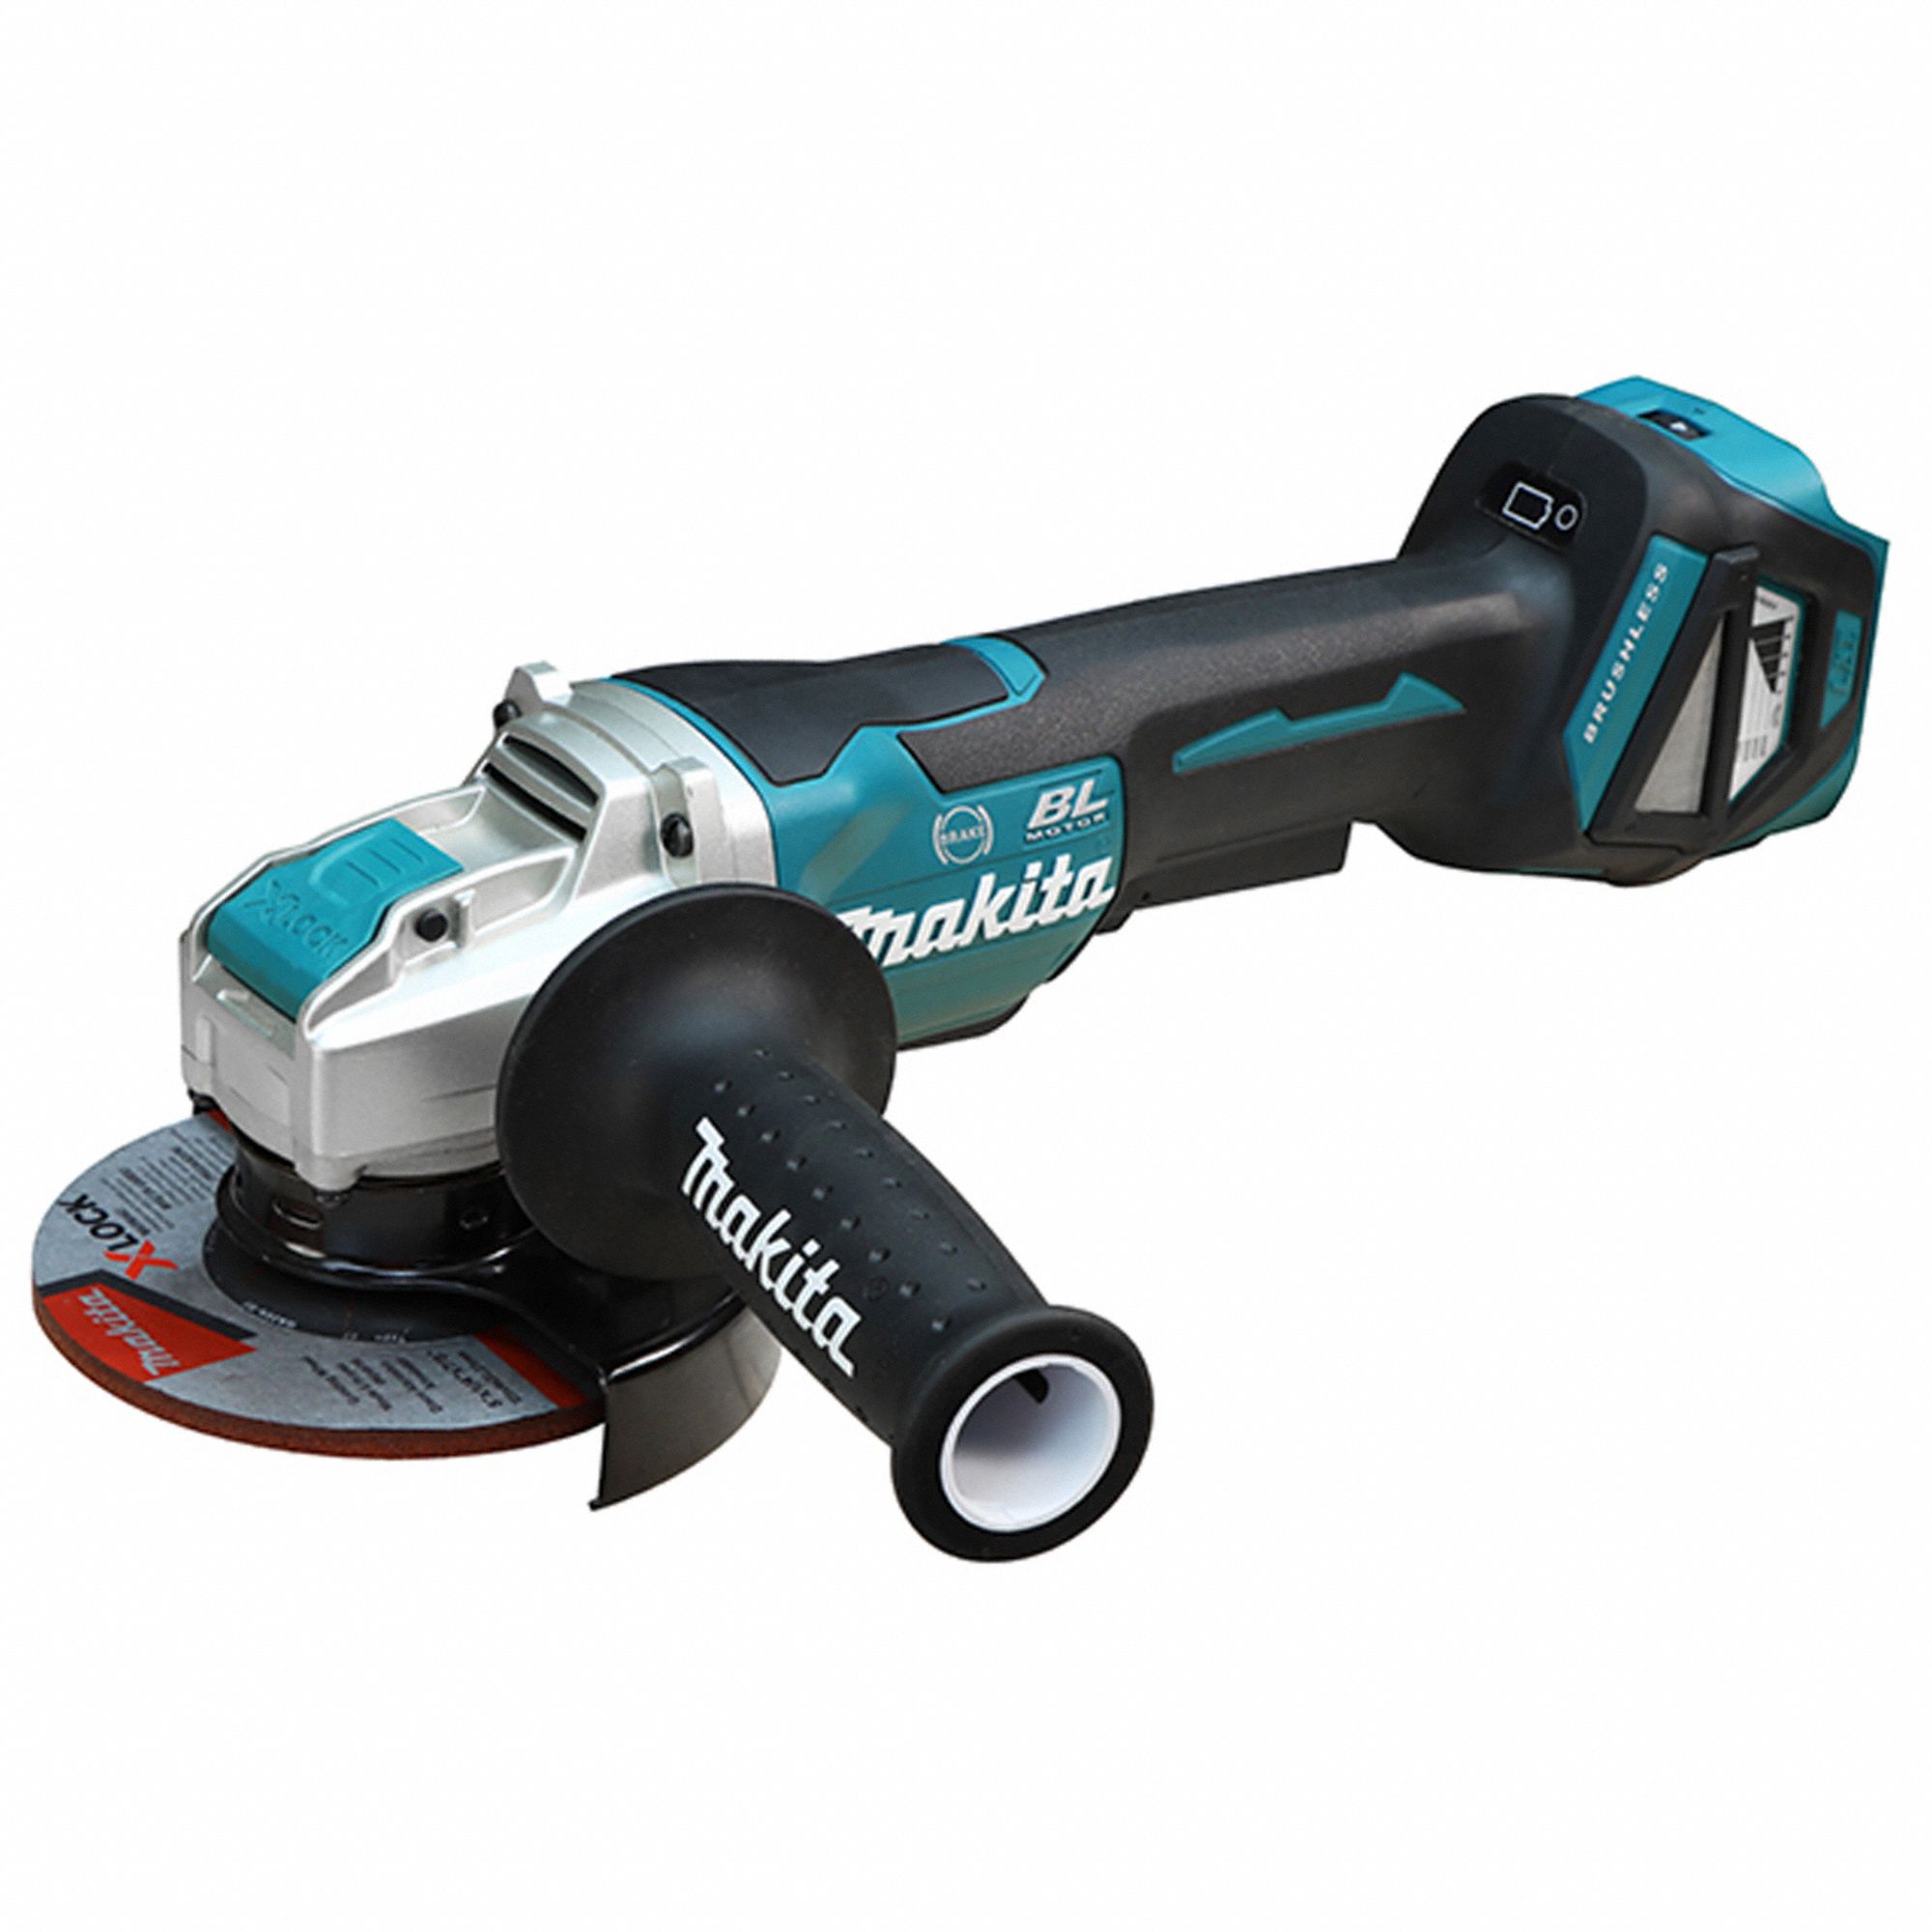 ANGLE GRINDER, CORDLESS, 18V LI-ION, 5 IN DIA, SAFETY PADDLE, VARIABLE,  ELECTRIC BRAKE